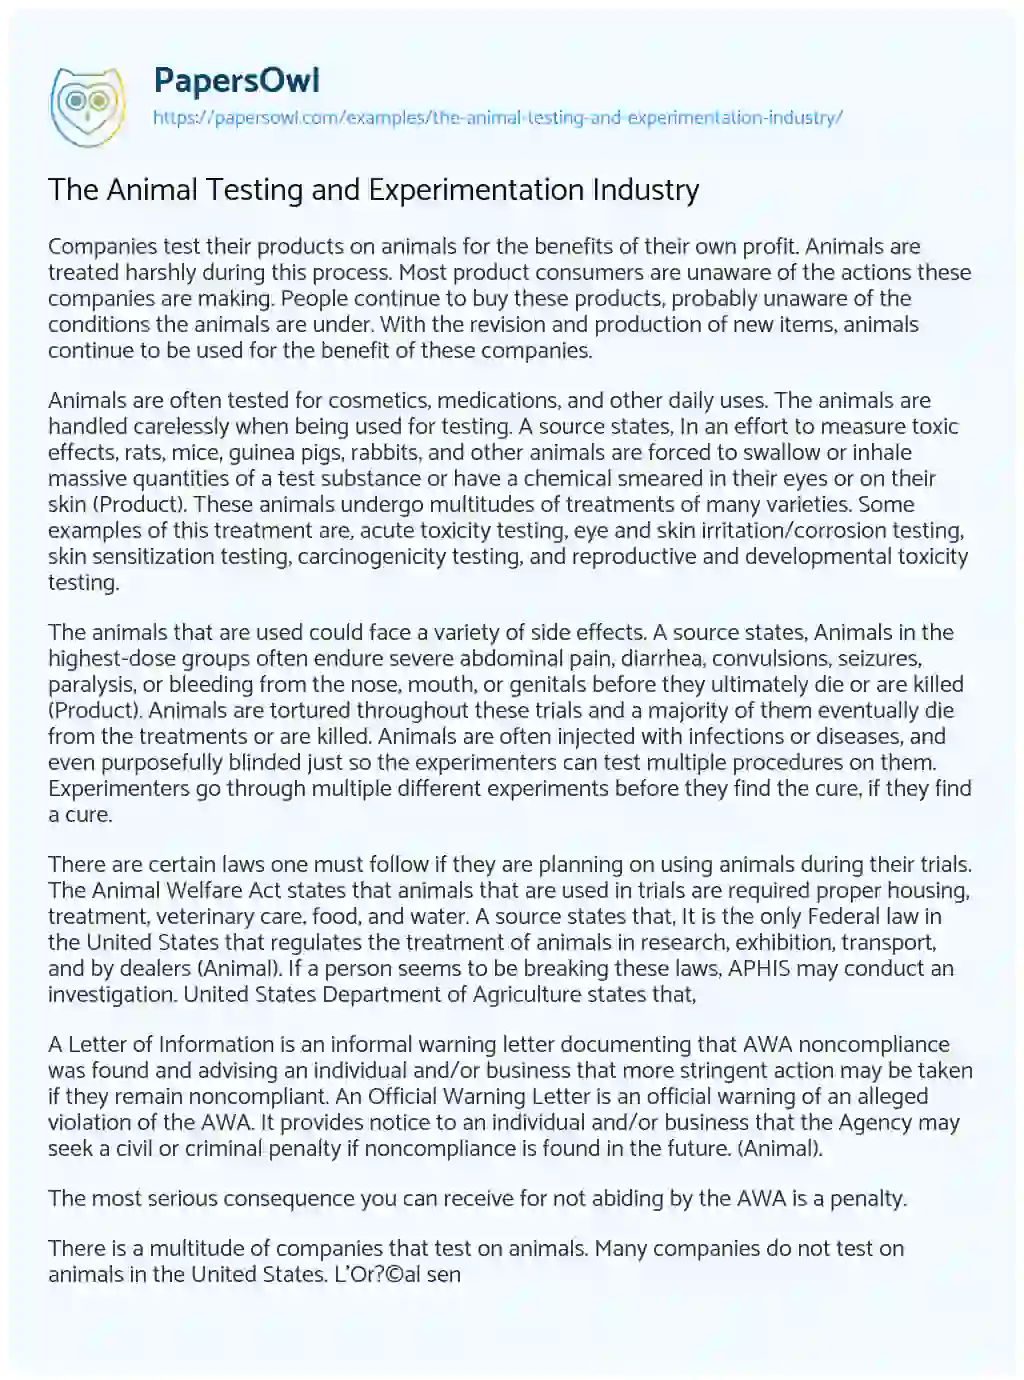 Essay on The Animal Testing and Experimentation Industry